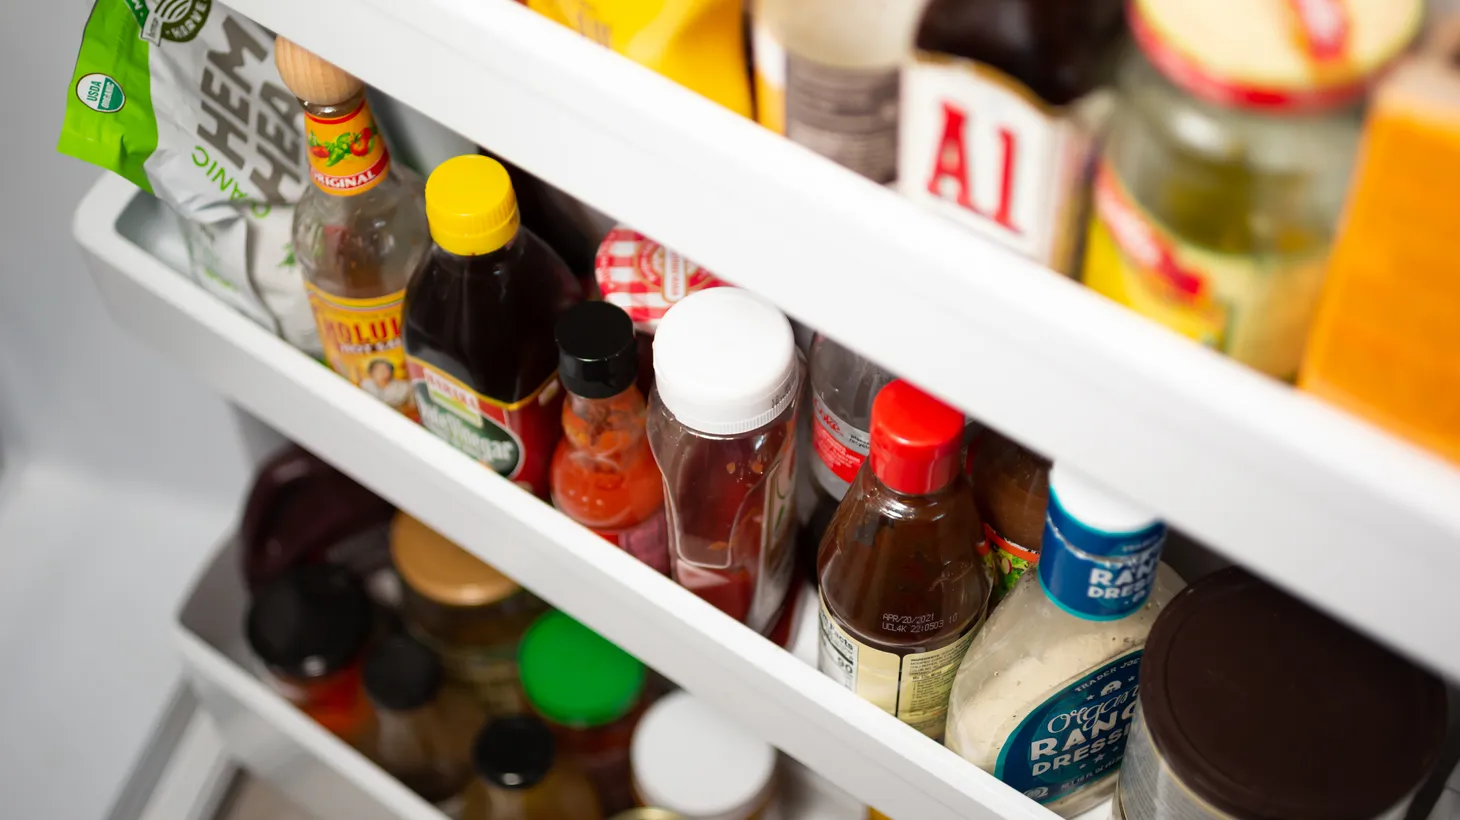 Condiments on the refrigerator door, like mustard and jams, can be used in unexpected ways to make the perfect salad dressing.